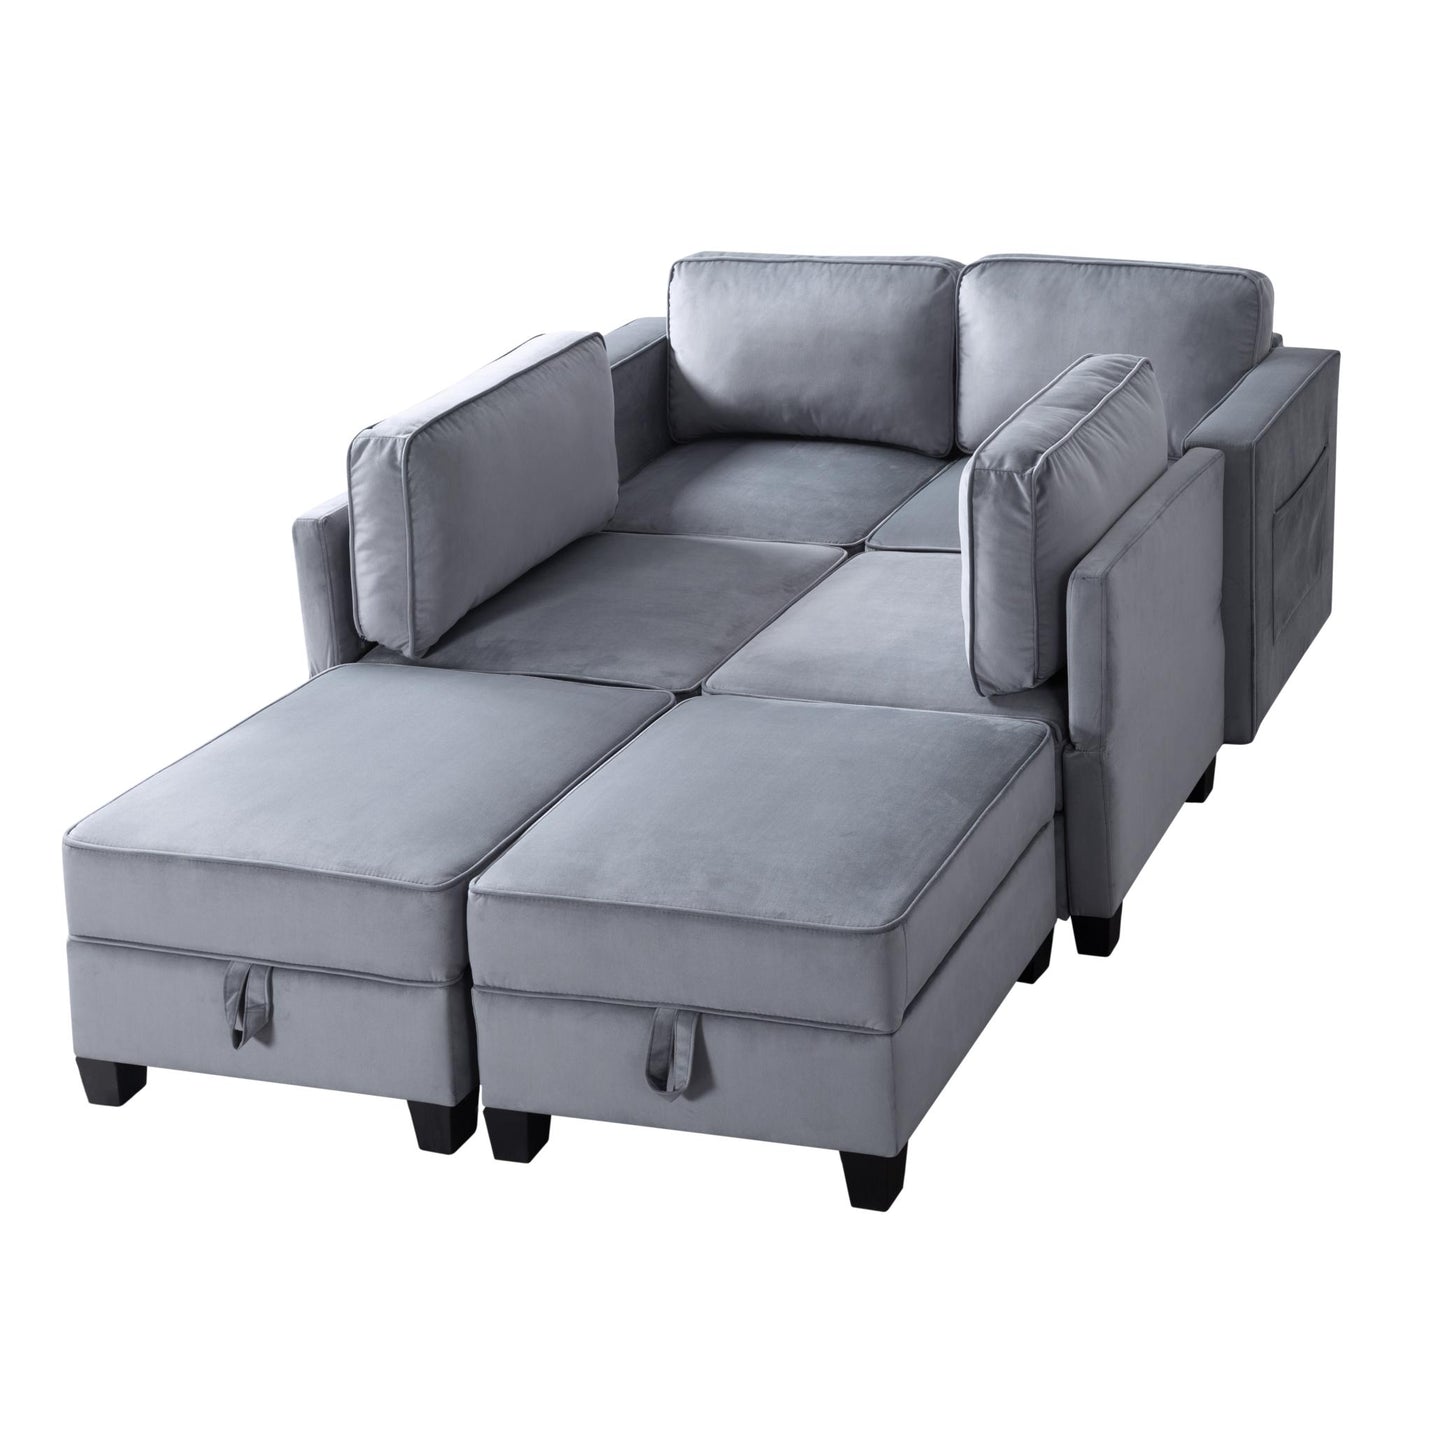 116” Square Arm Sectional Sofa